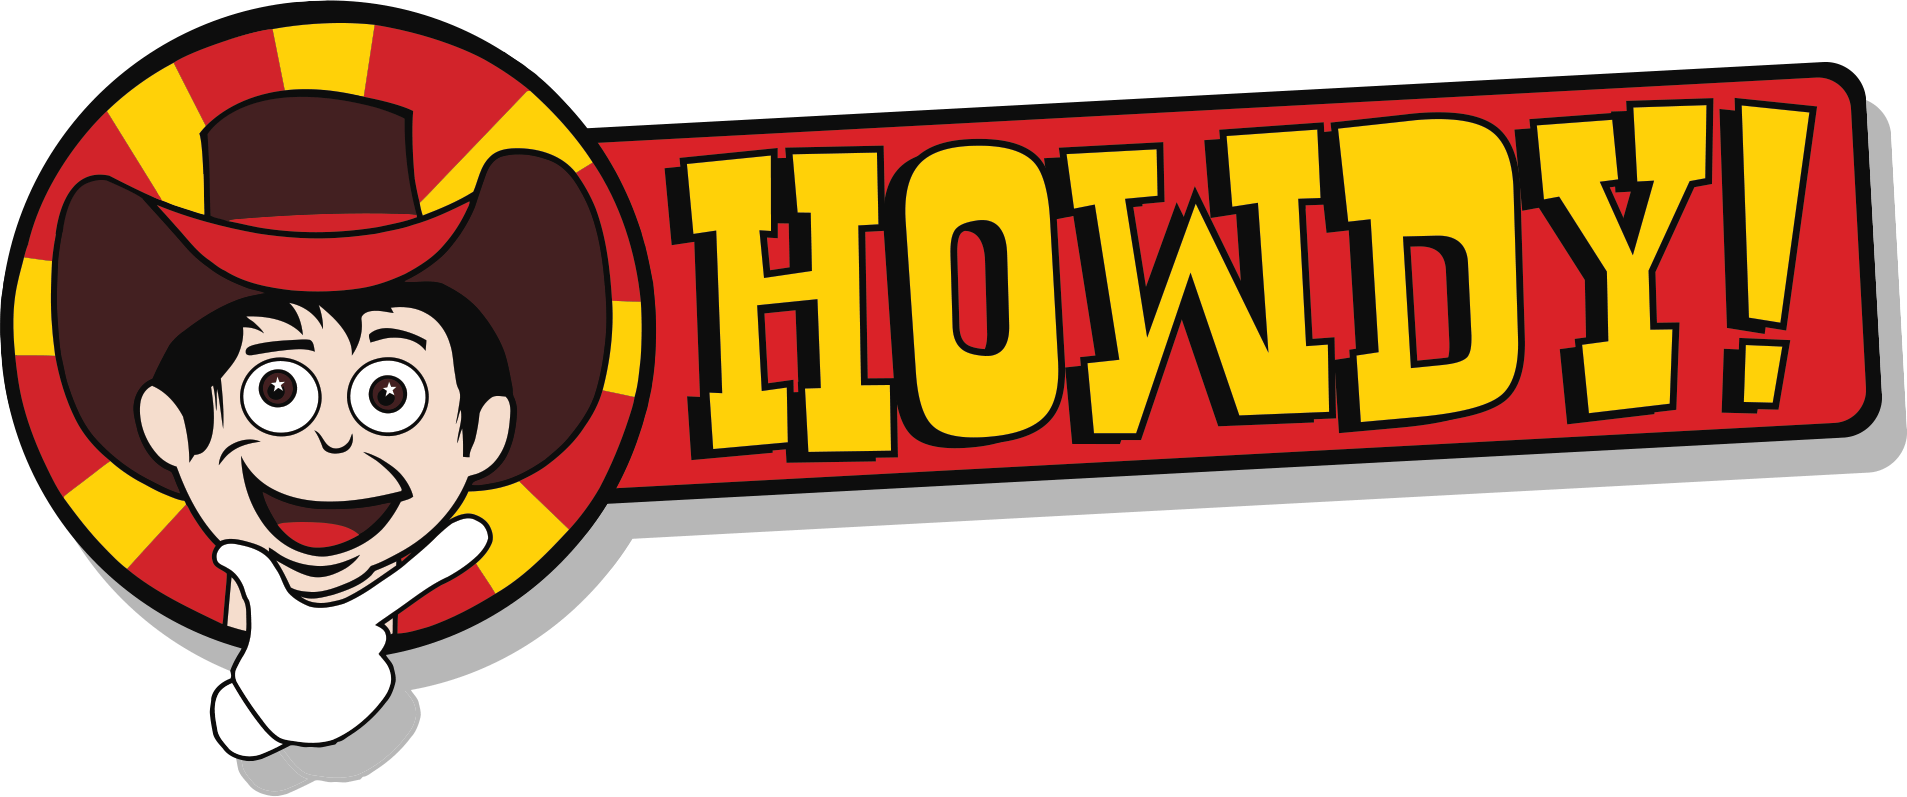 howdy-about-logo.png